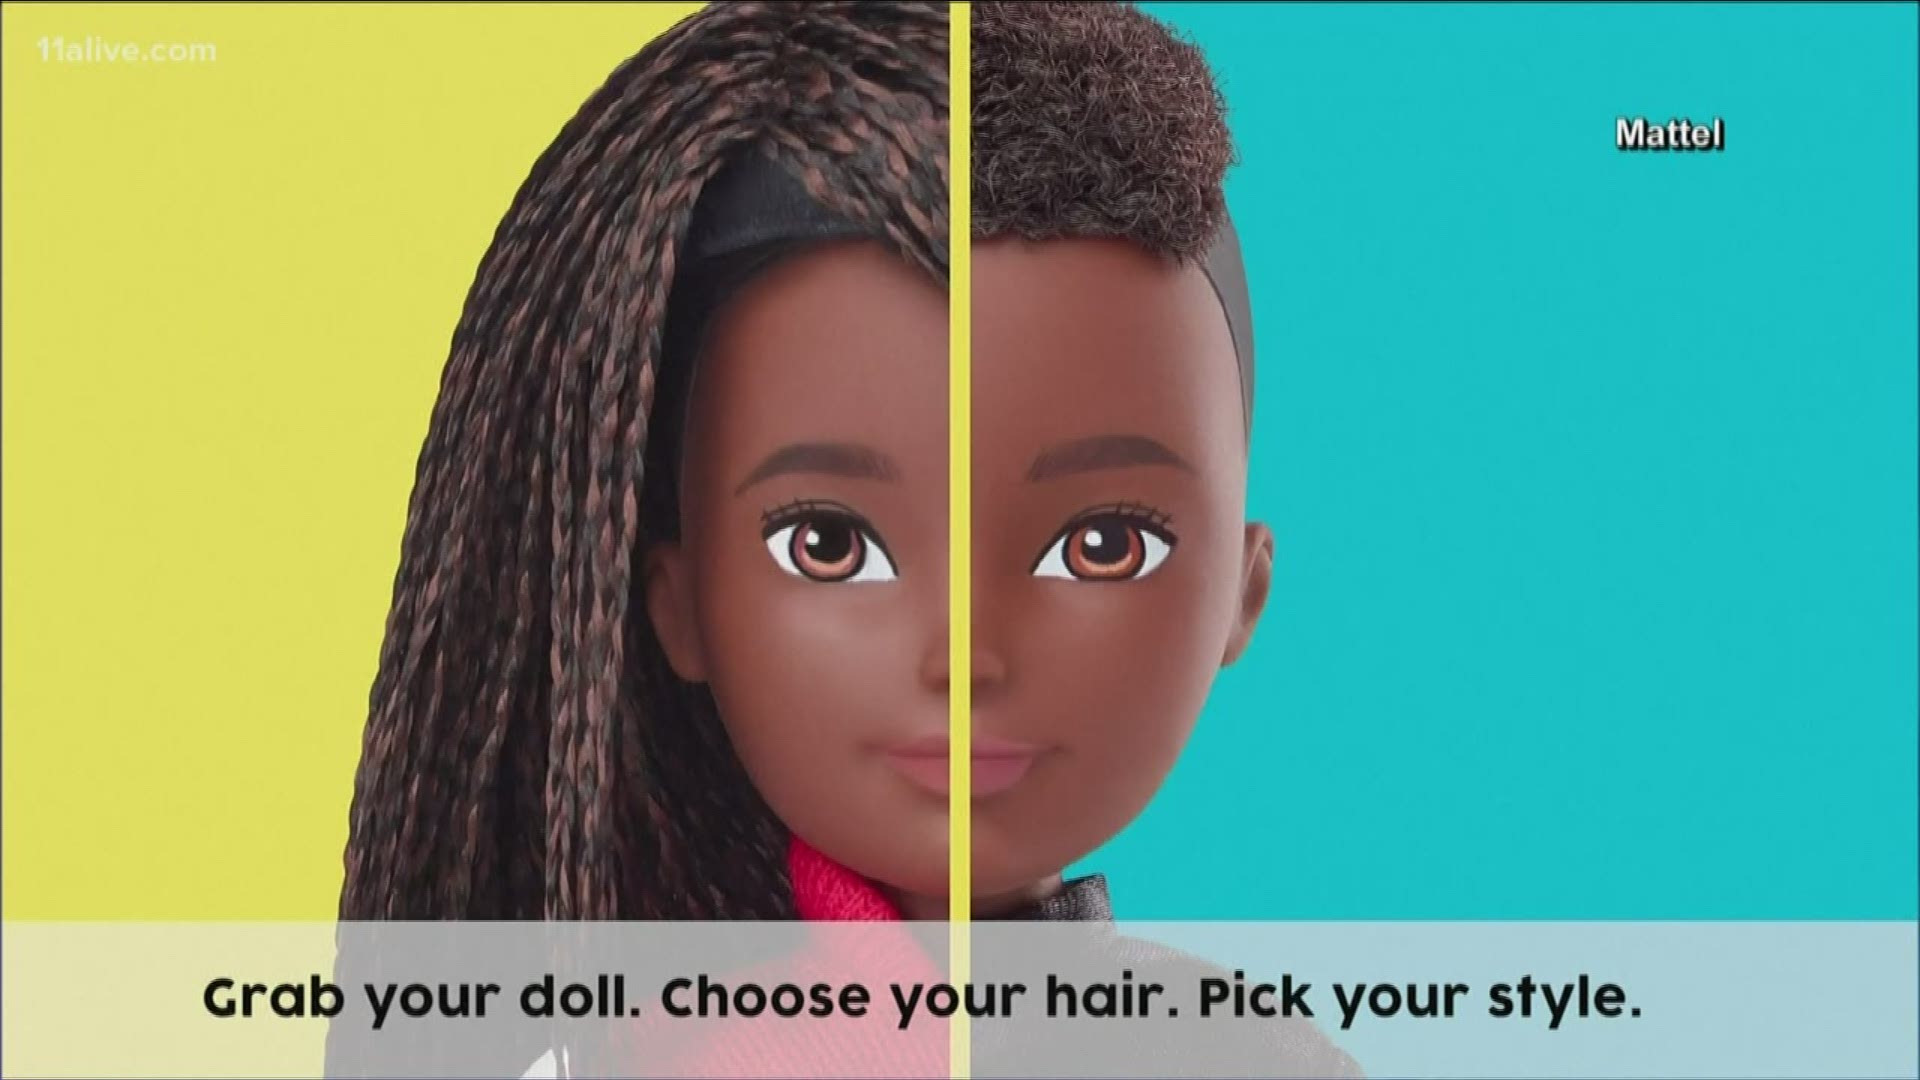 The new gender-neutral line of dolls is called "Createable World."